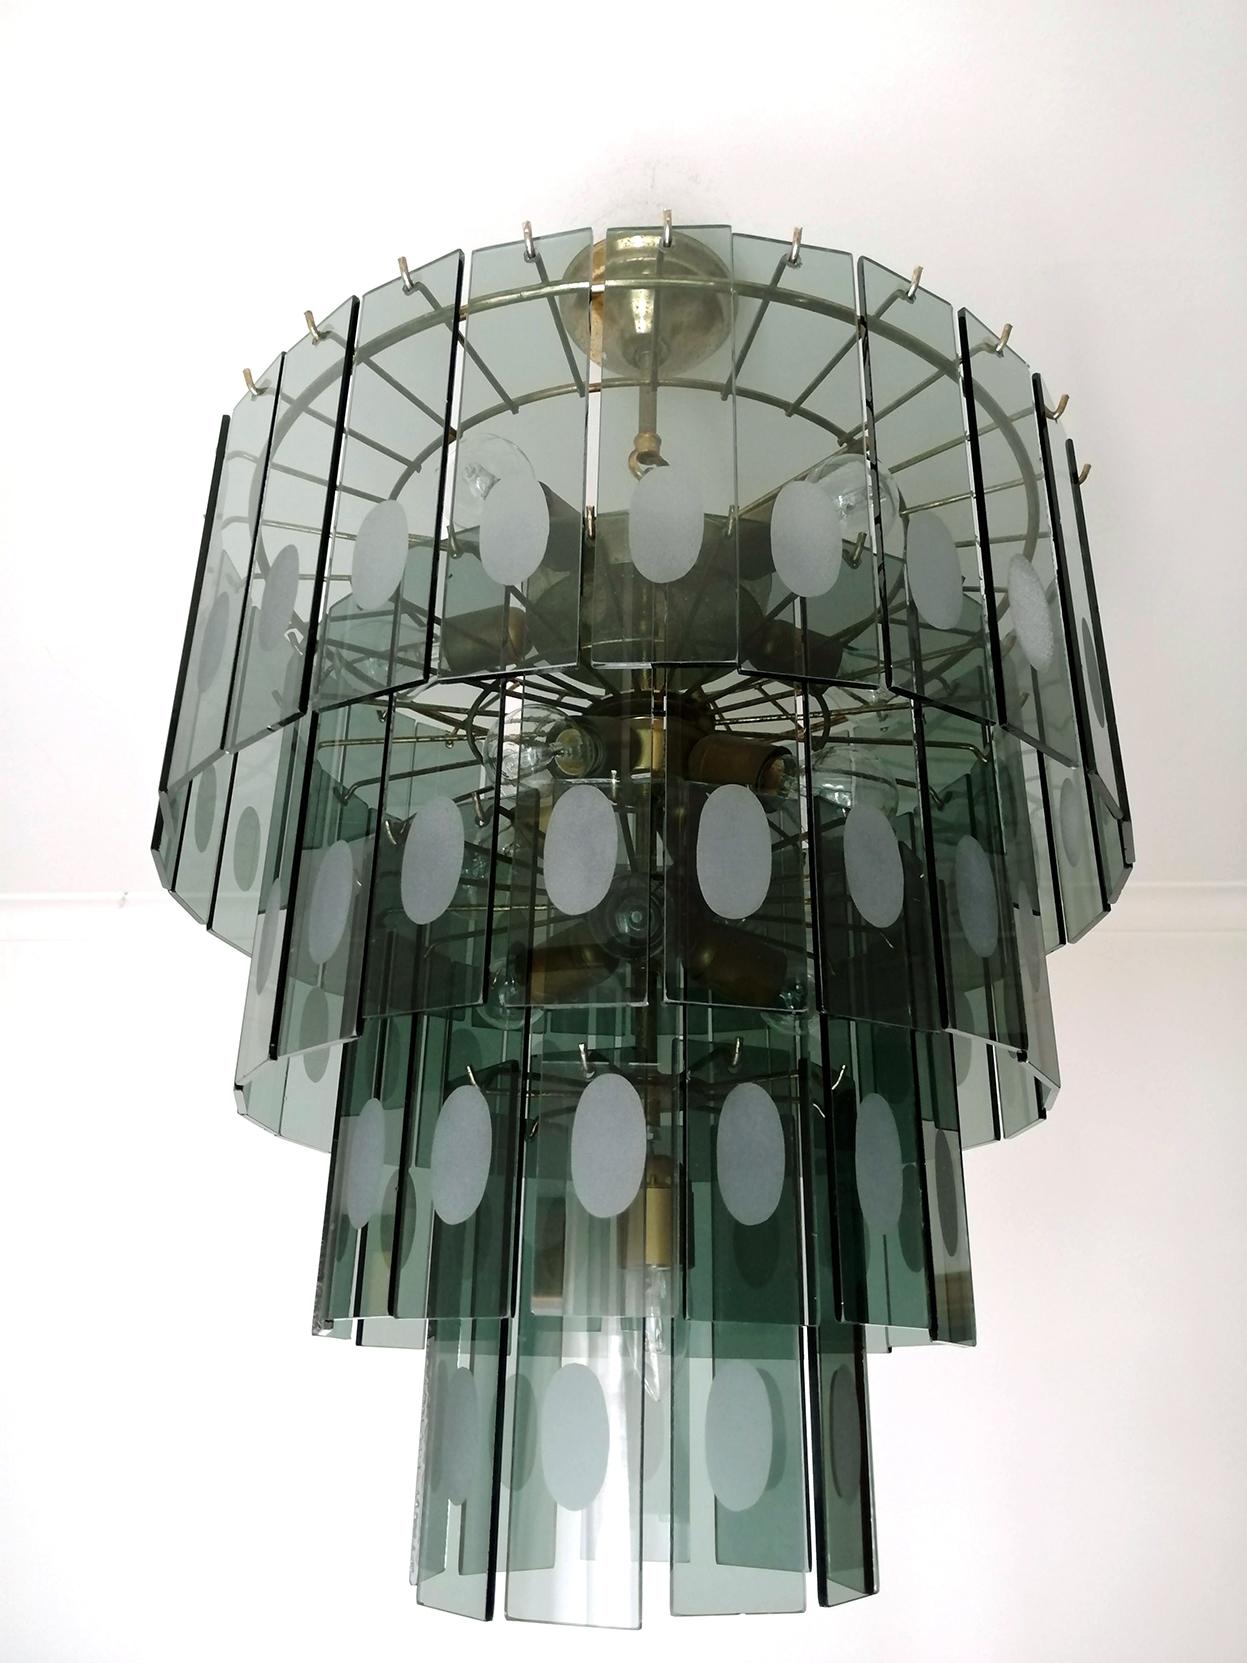 Large Italian Max Ingrand Fontana Art Style Smoked Glass 13-Light Chandelier In Good Condition For Sale In Coimbra, PT